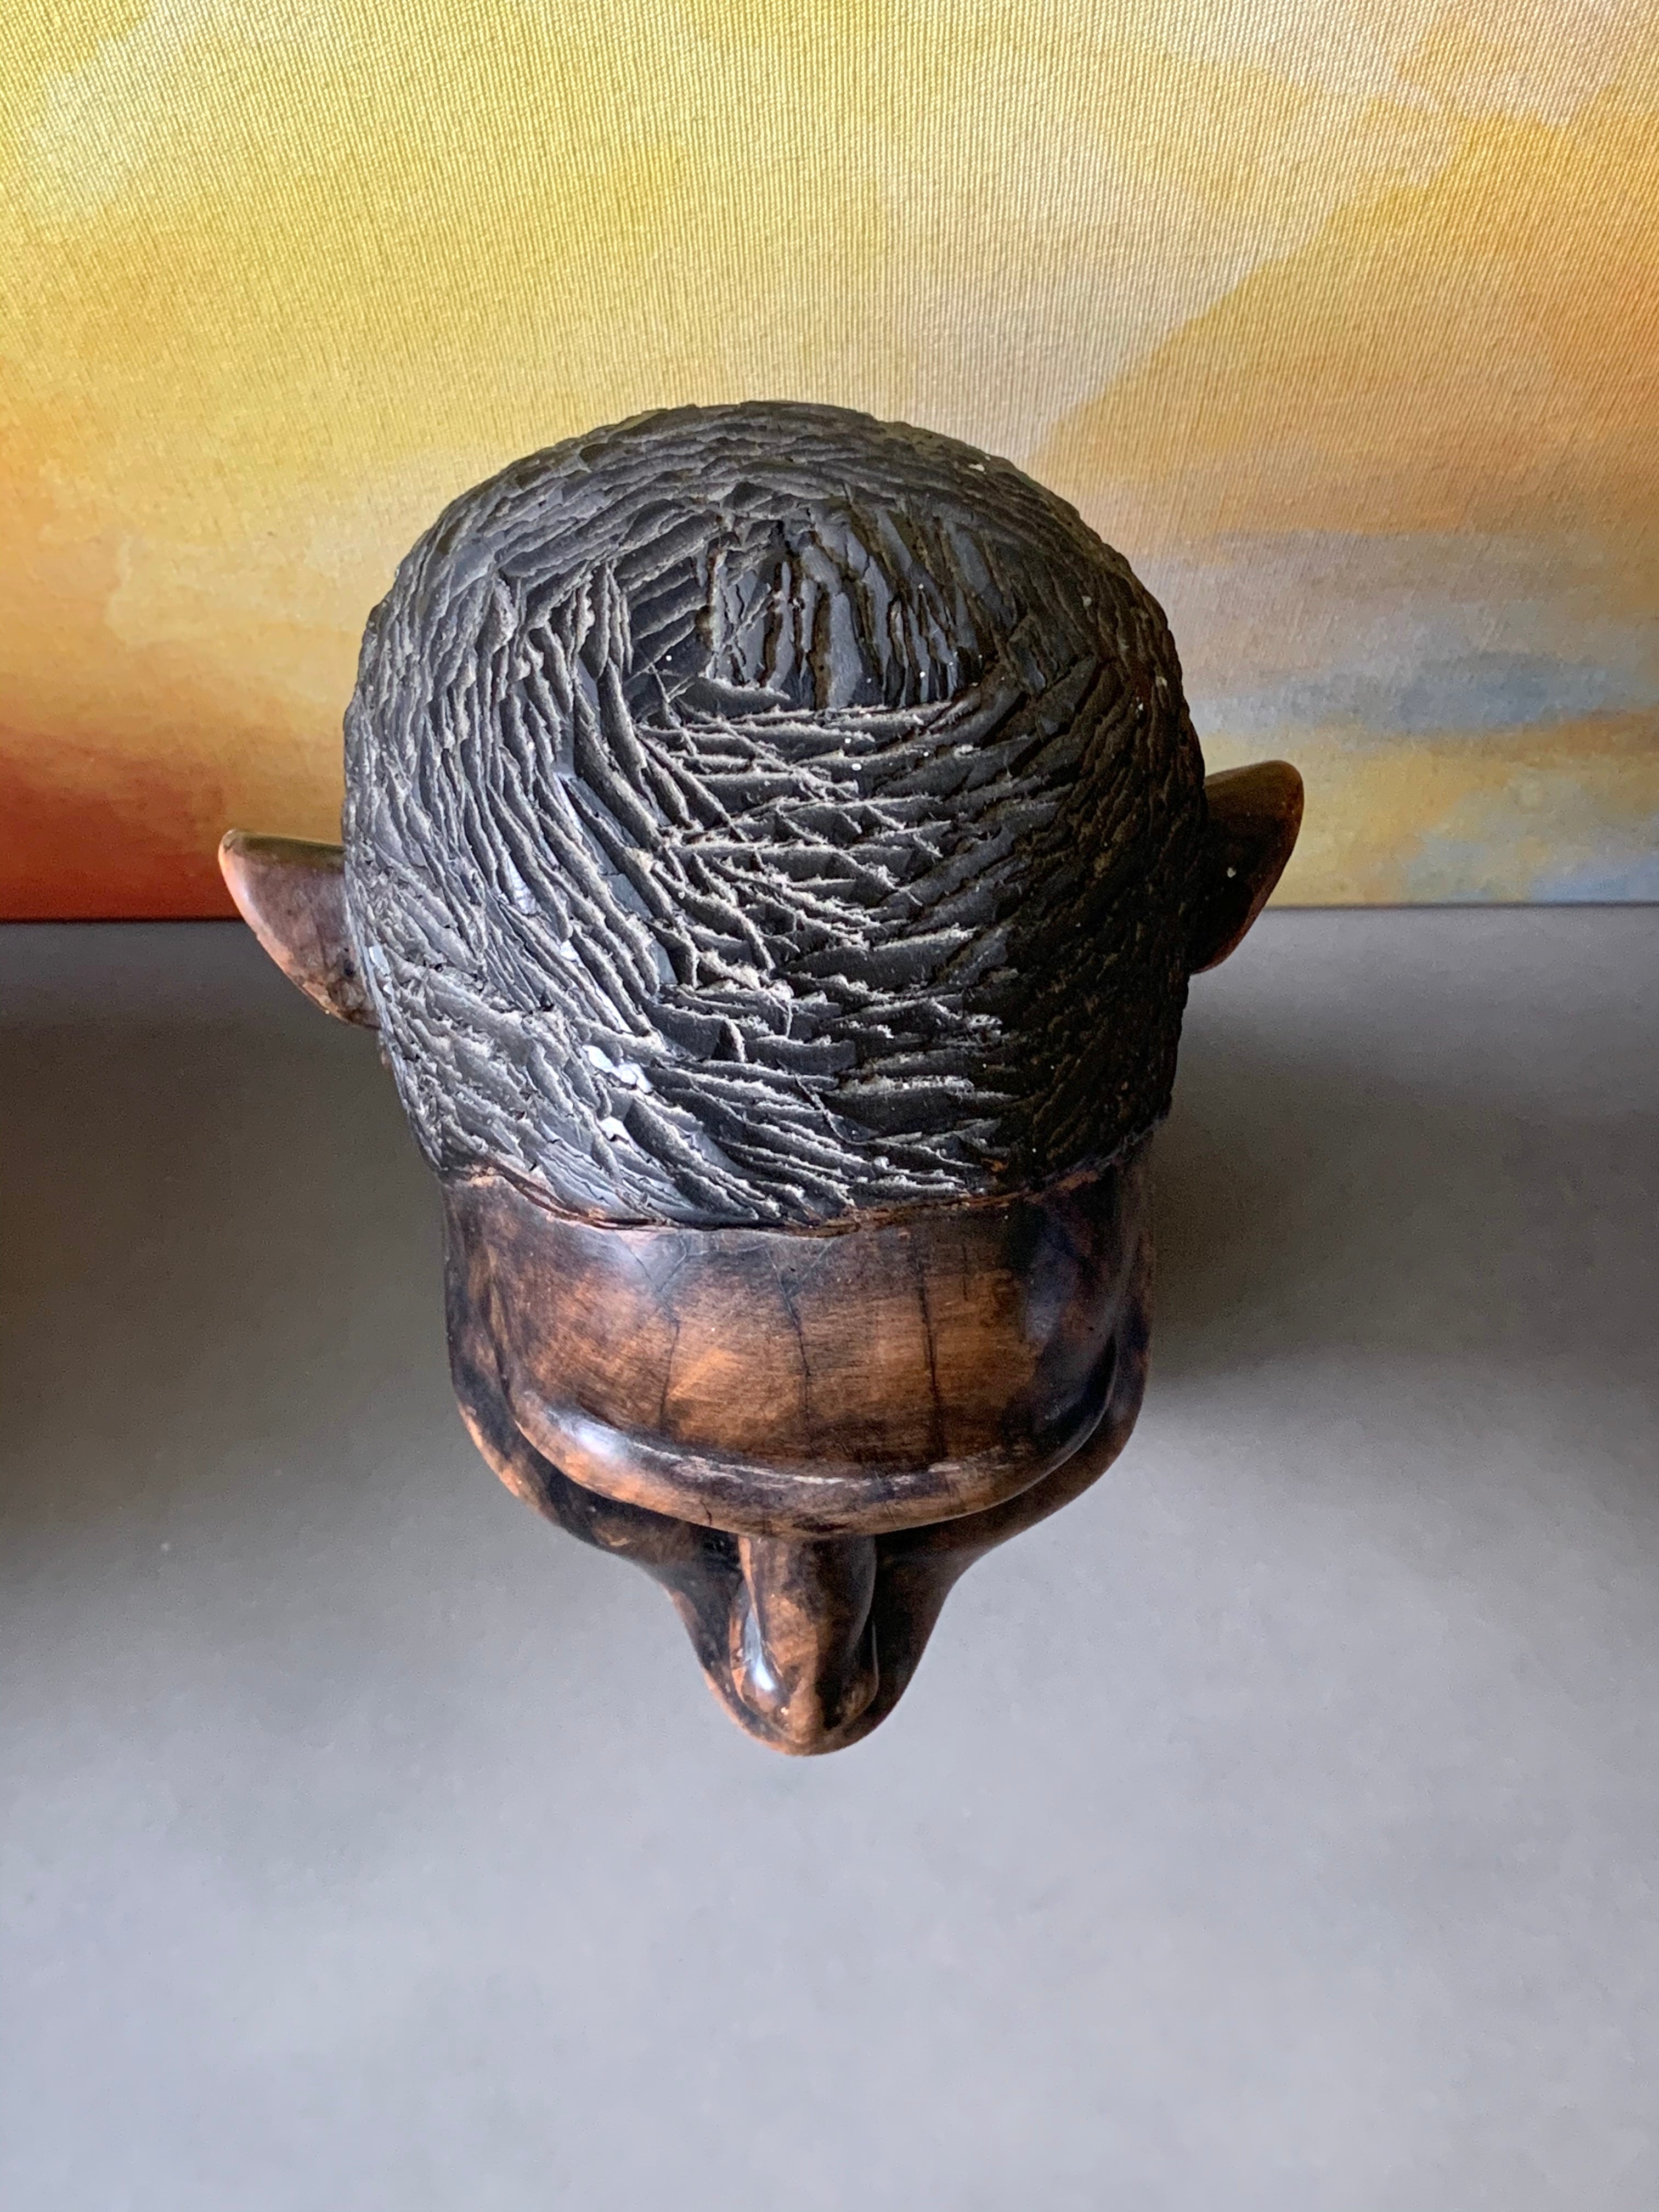 Hand Carved Wood Sculpture